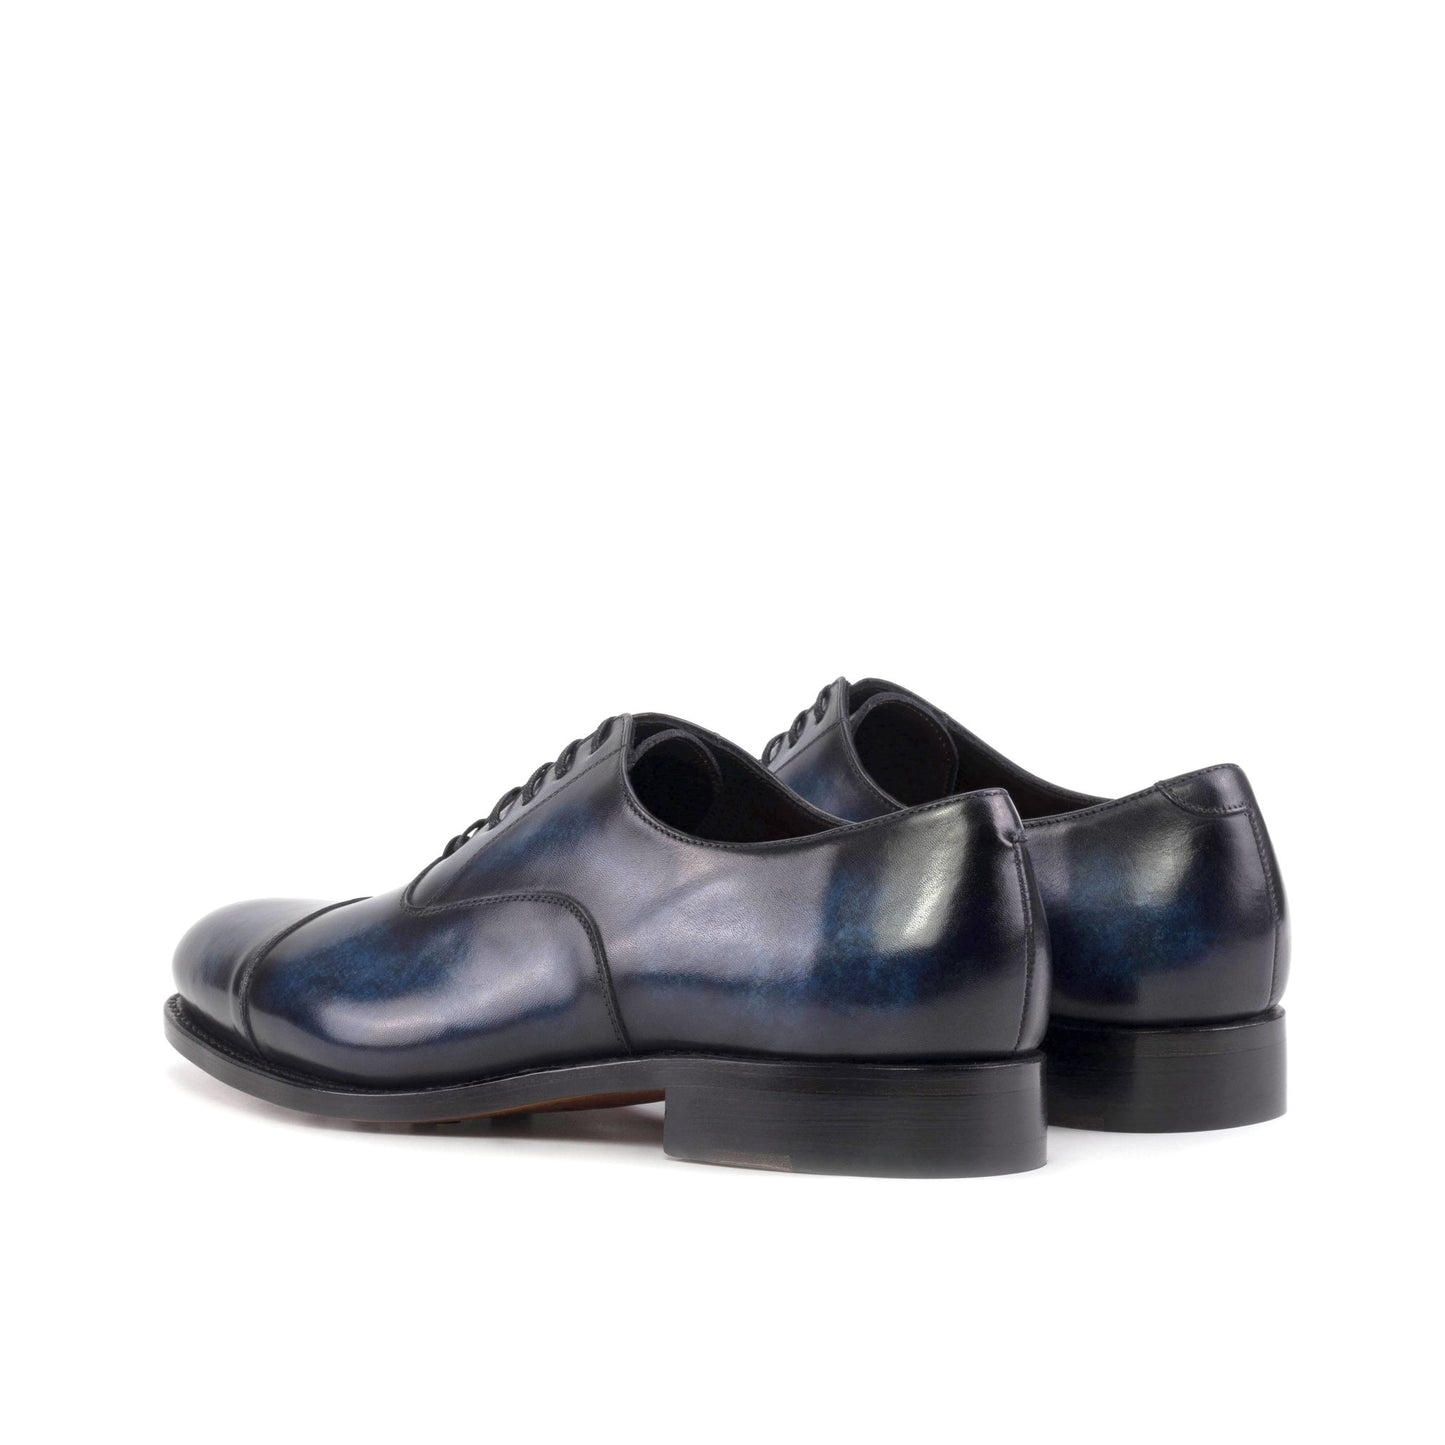 Cap Toe Oxford in Denim Patina - Zatorres | Free Shipping on orders over $200